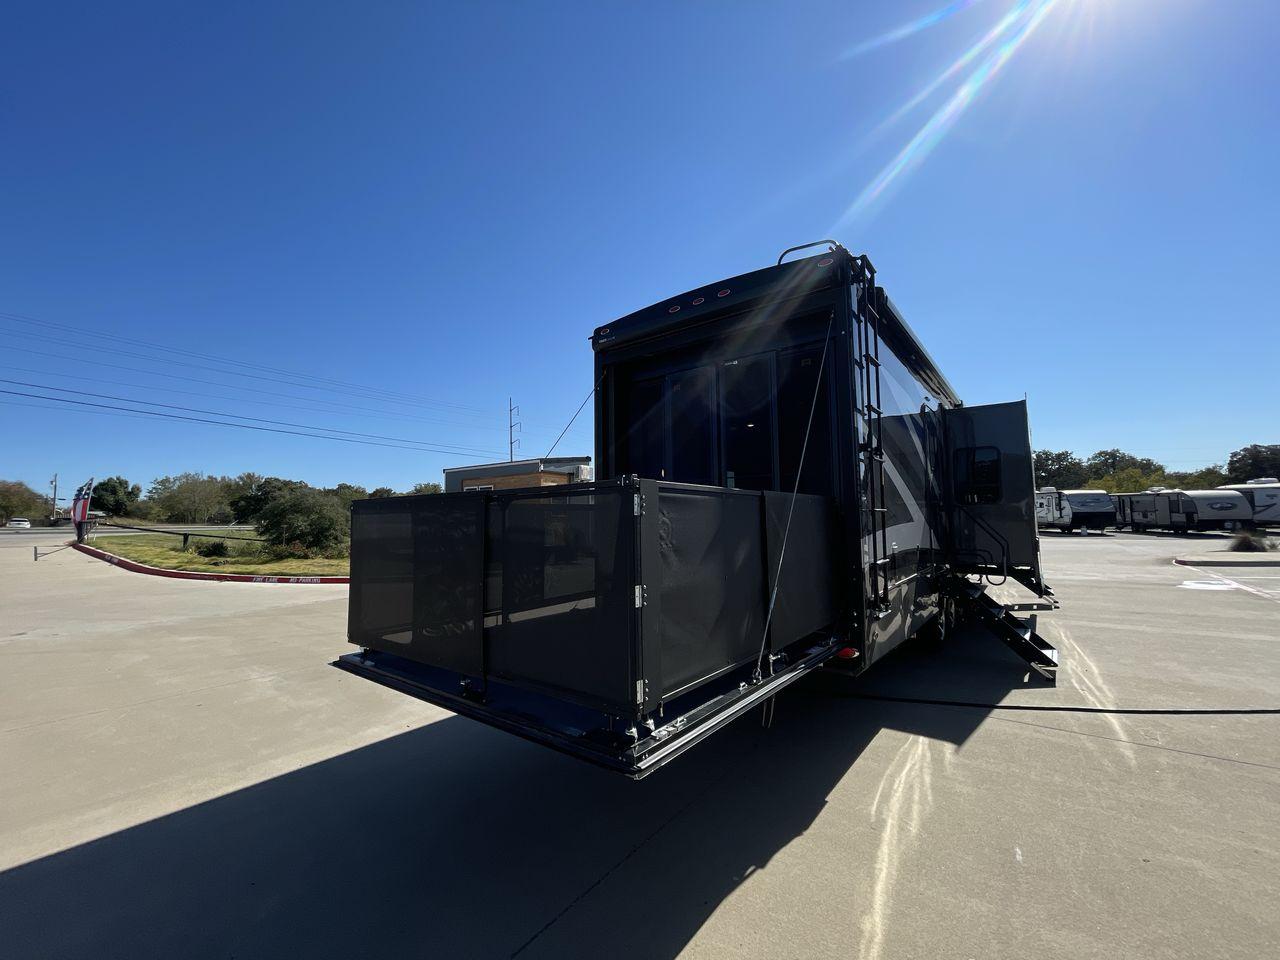 2022 VANLEIGH AMBITION 399TH (7HHAC4333NV) , Length: 43.58 ft. | Dry Weight: 16,900 lbs. | Gross Weight: 21,000 lbs. | Slides: 2 transmission, located at 4319 N Main St, Cleburne, TX, 76033, (817) 678-5133, 32.385960, -97.391212 - If you're in the market for a top-of-the-line Toy Hauler, look no further than RV Depot in Cleburne, TX. We are proud to present the VANLEIGH AMBITION 399TH, a luxurious and spacious RV that is sure to enhance your next adventure. With a price of $99,987, this 2022 model is a steal! Located in Cleb - Photo #30